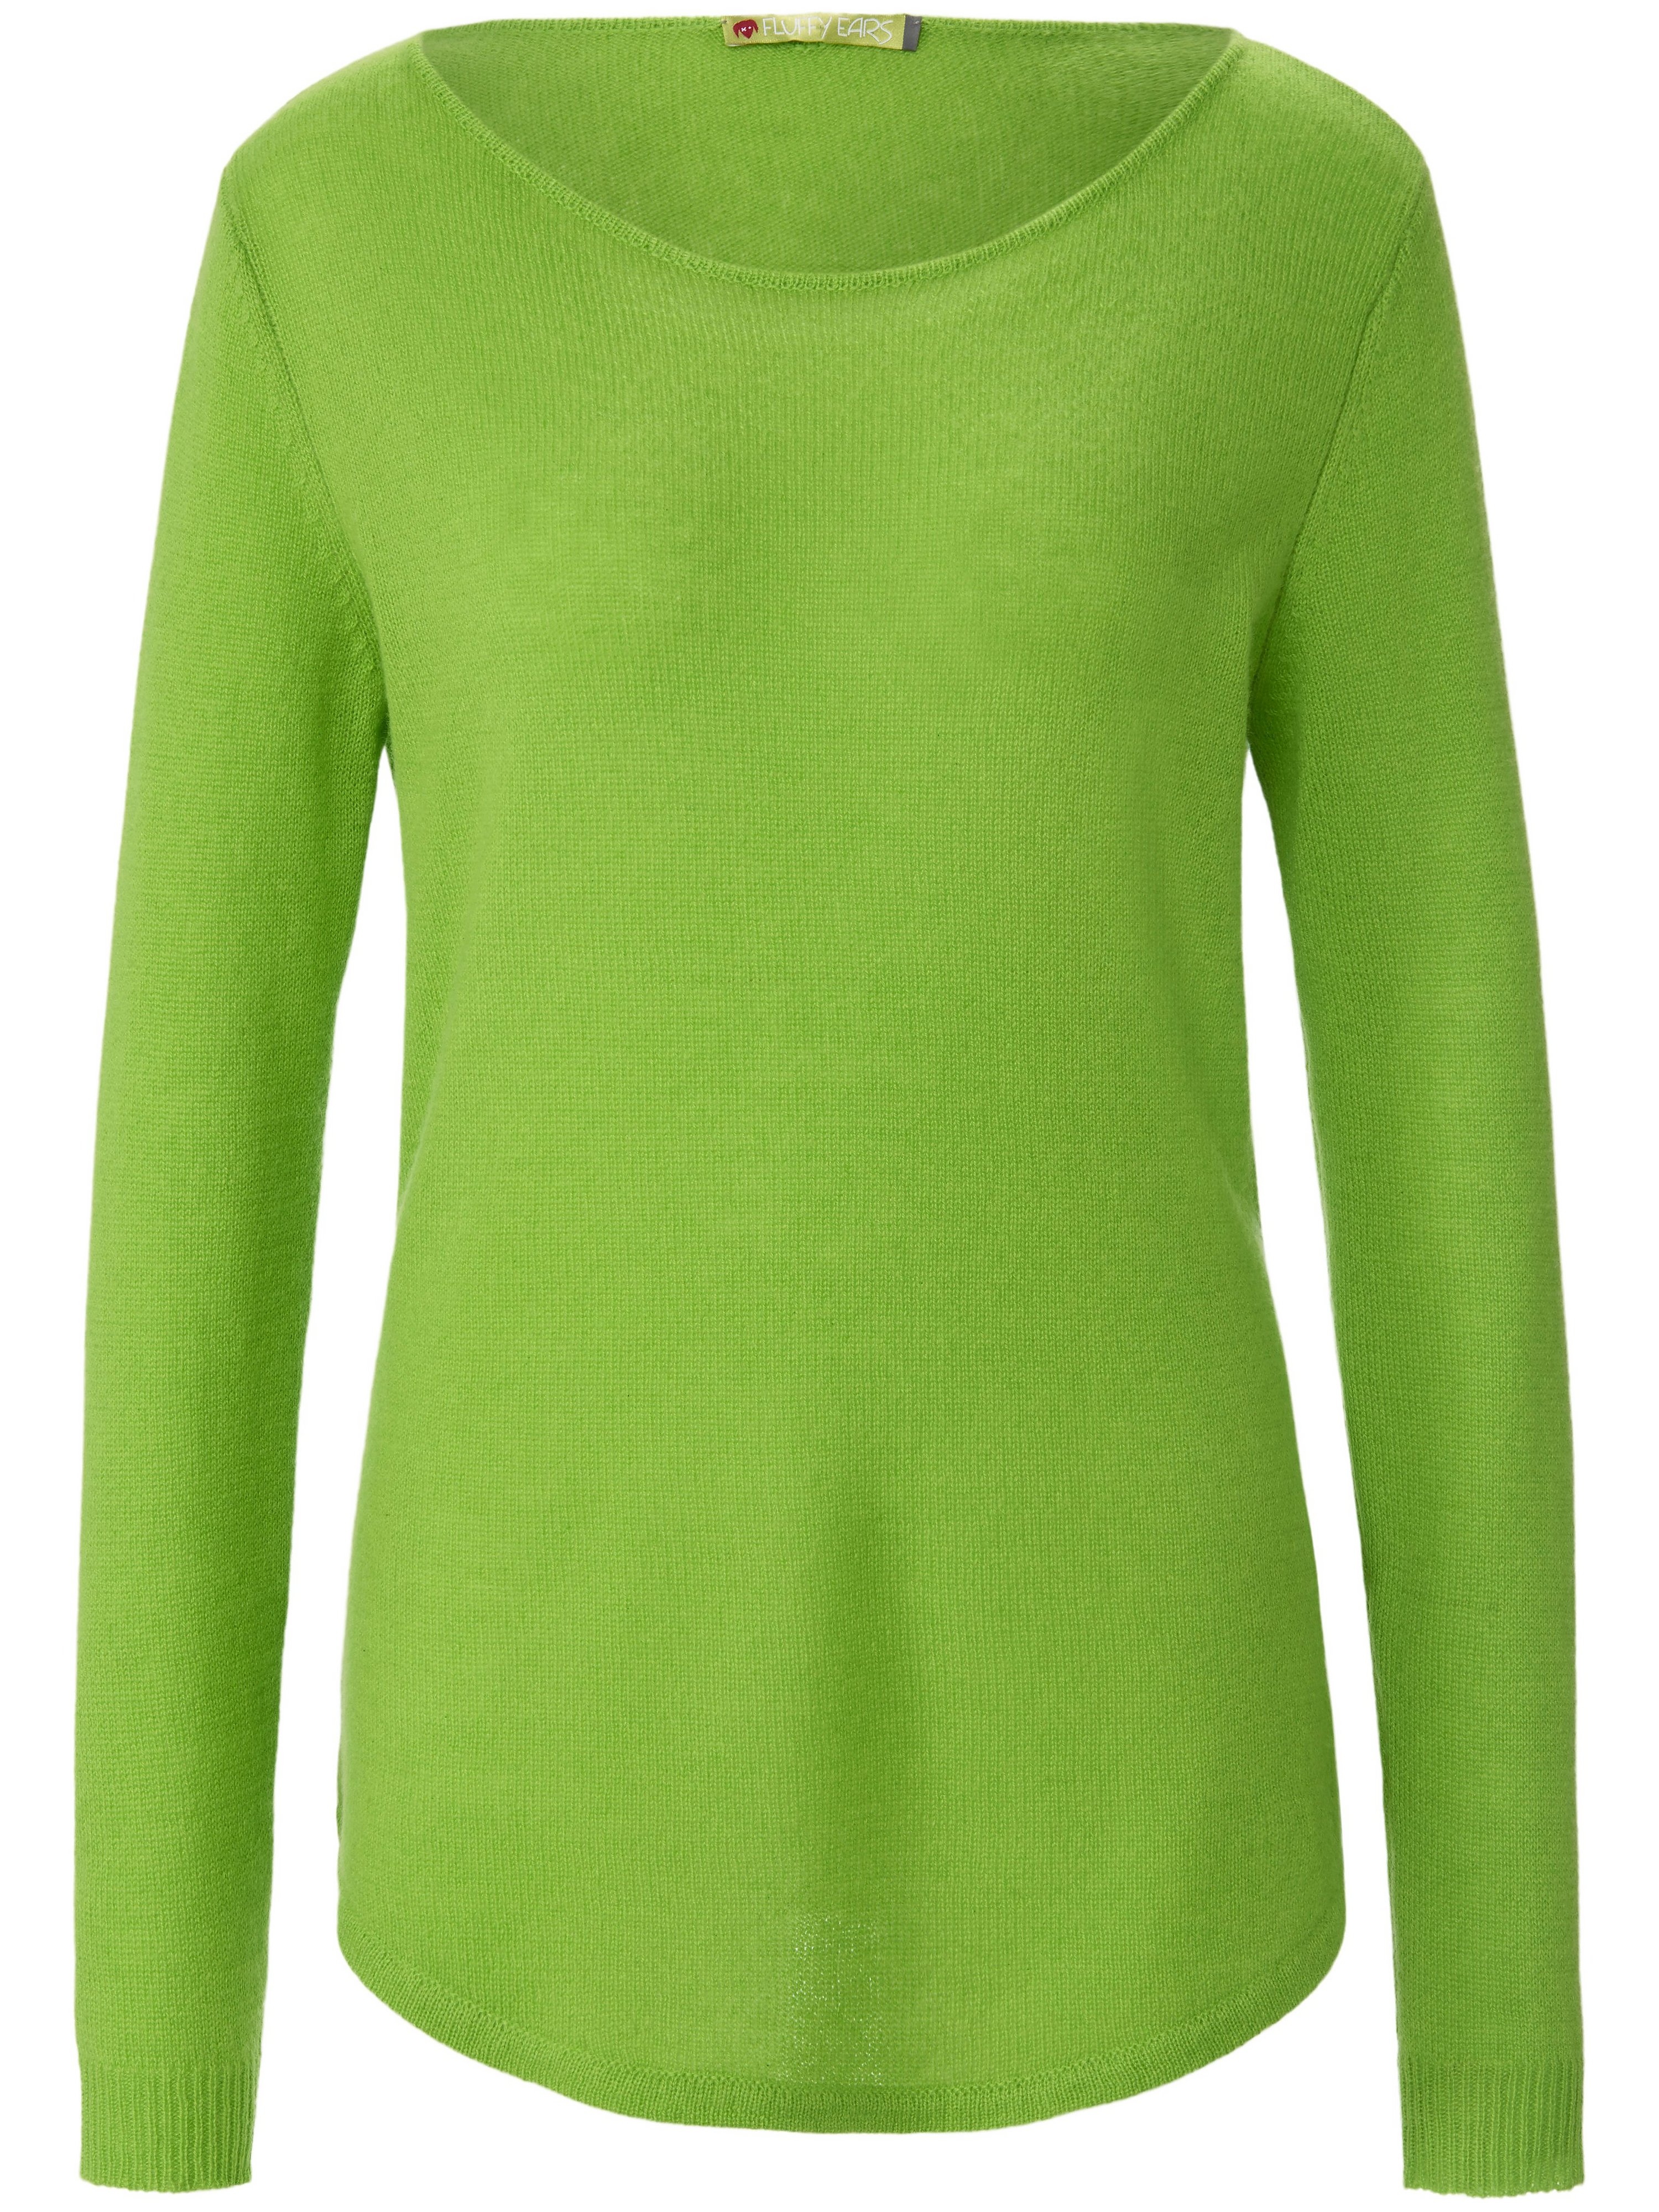 Le pull 100% cachemire  FLUFFY EARS vert taille 50